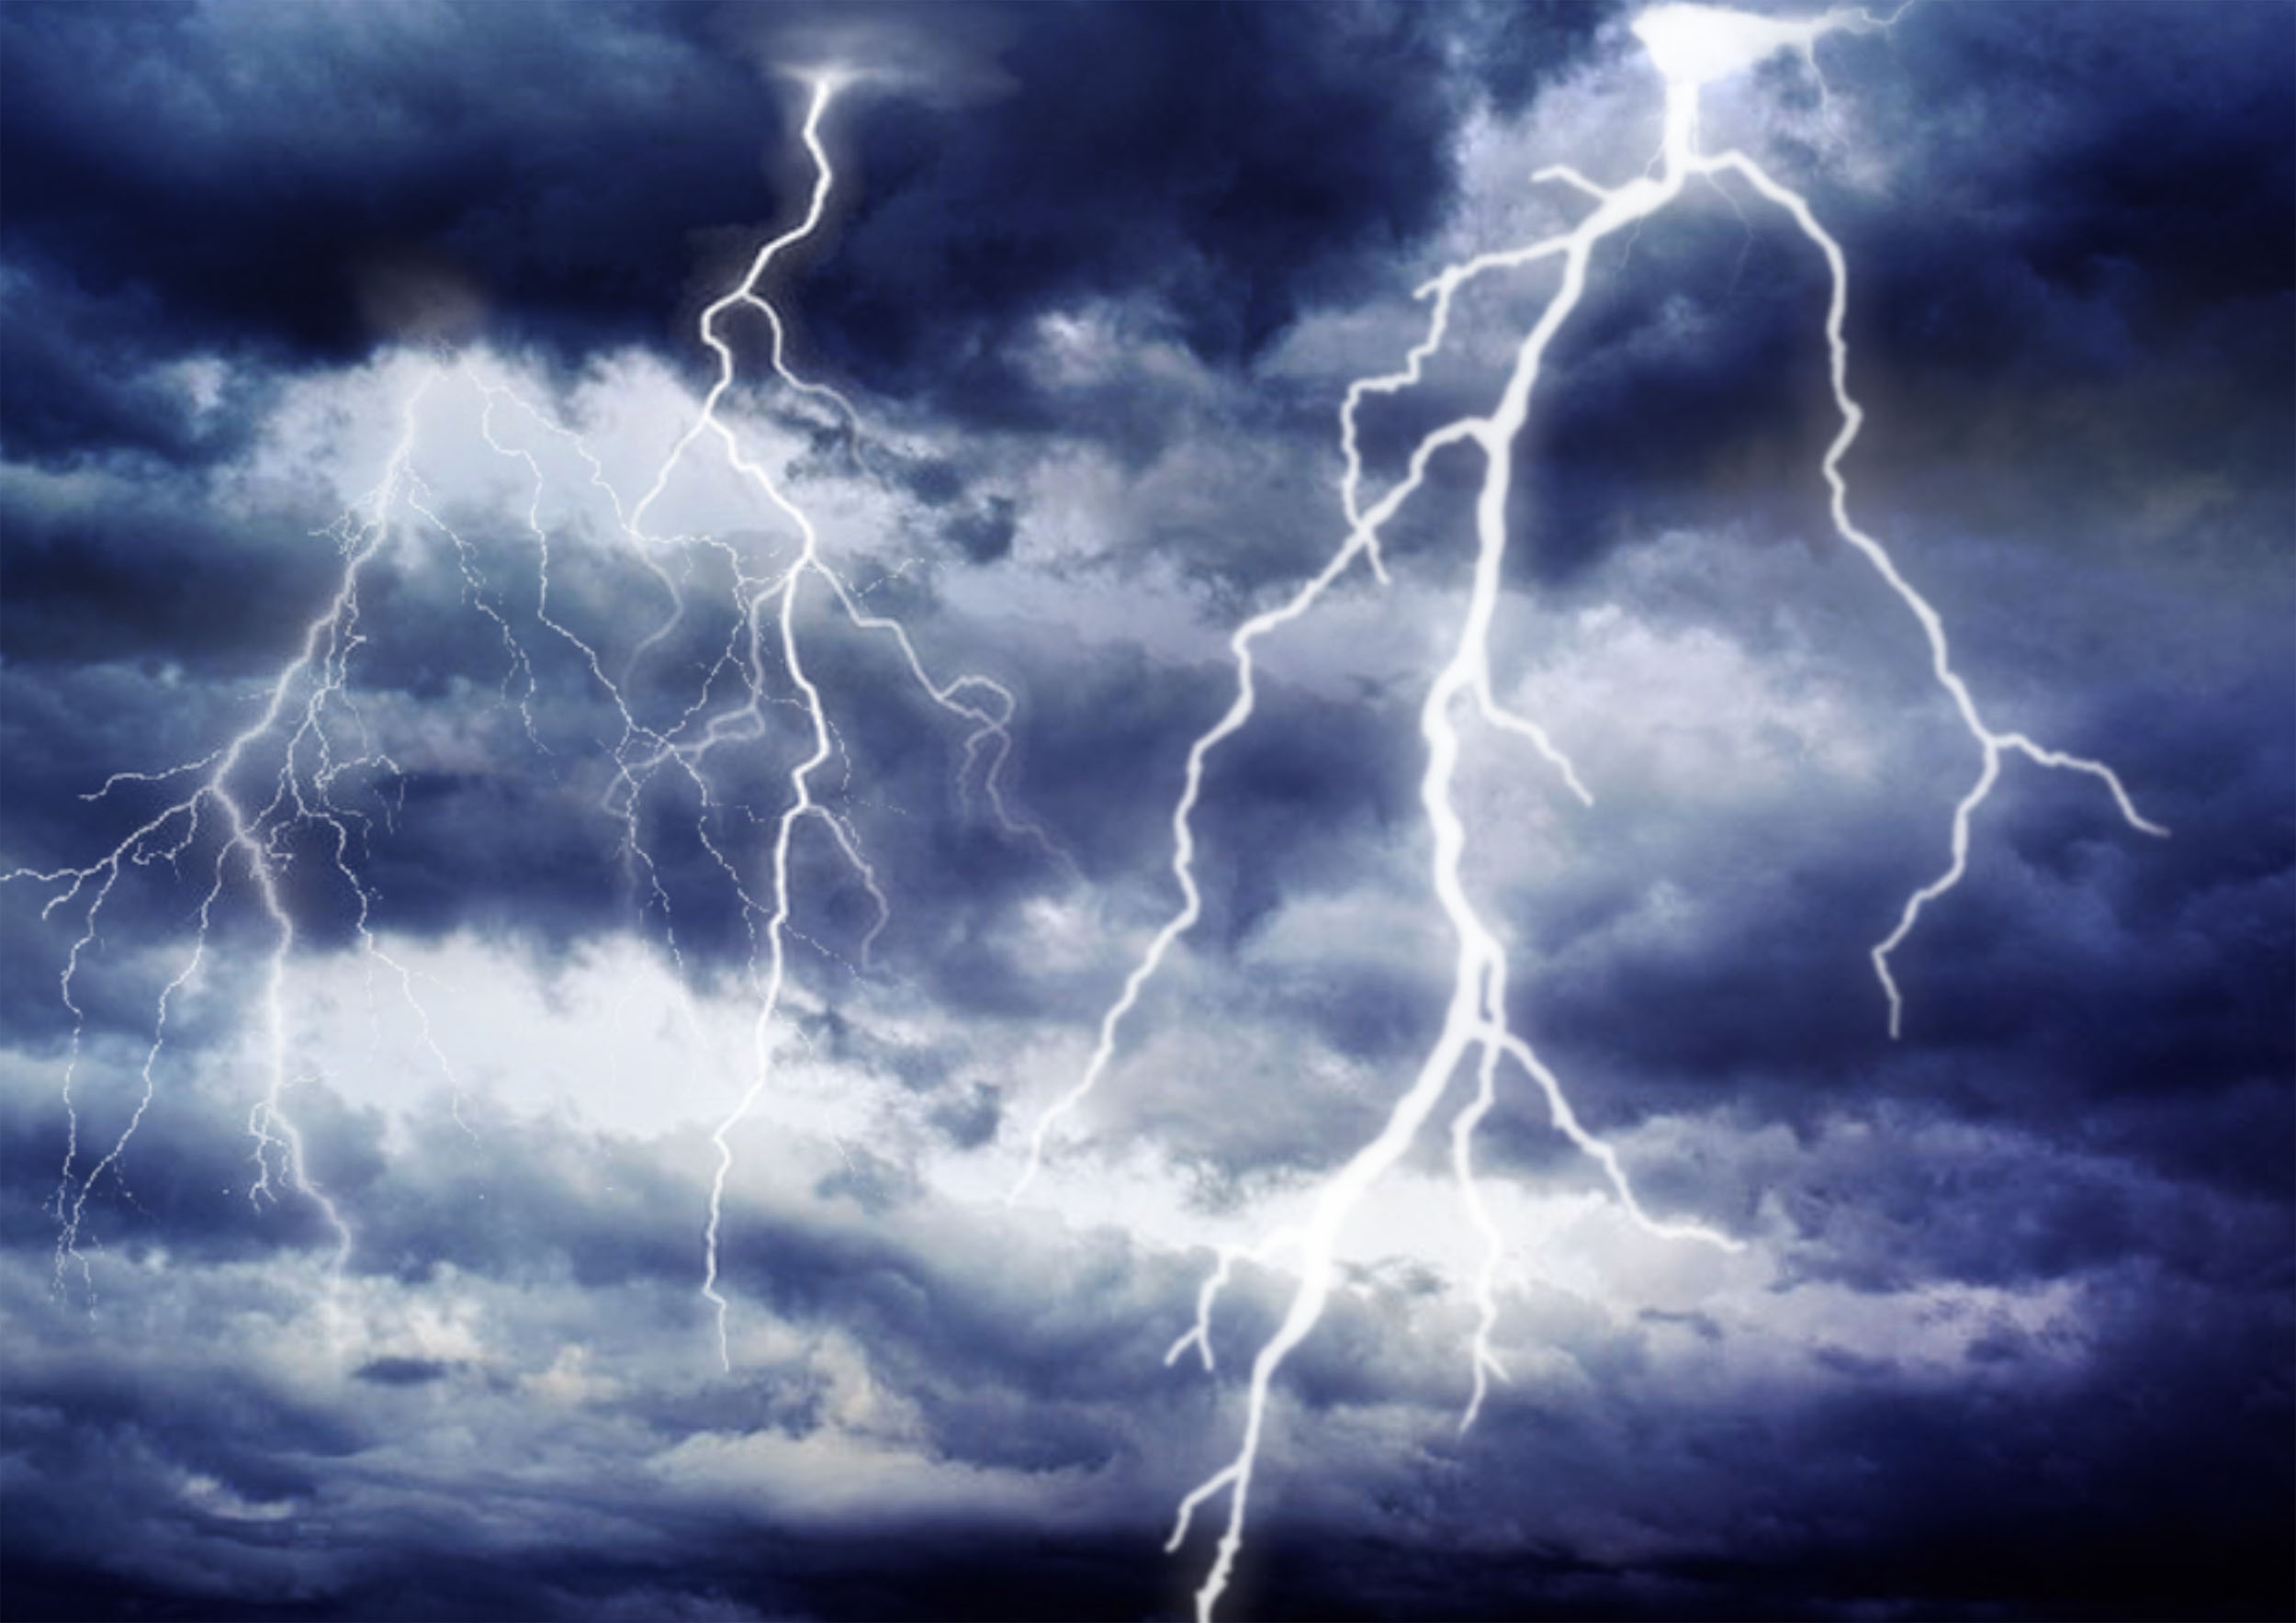 Nature sounds for sleep -thunder strikes from a dark cloudy sky